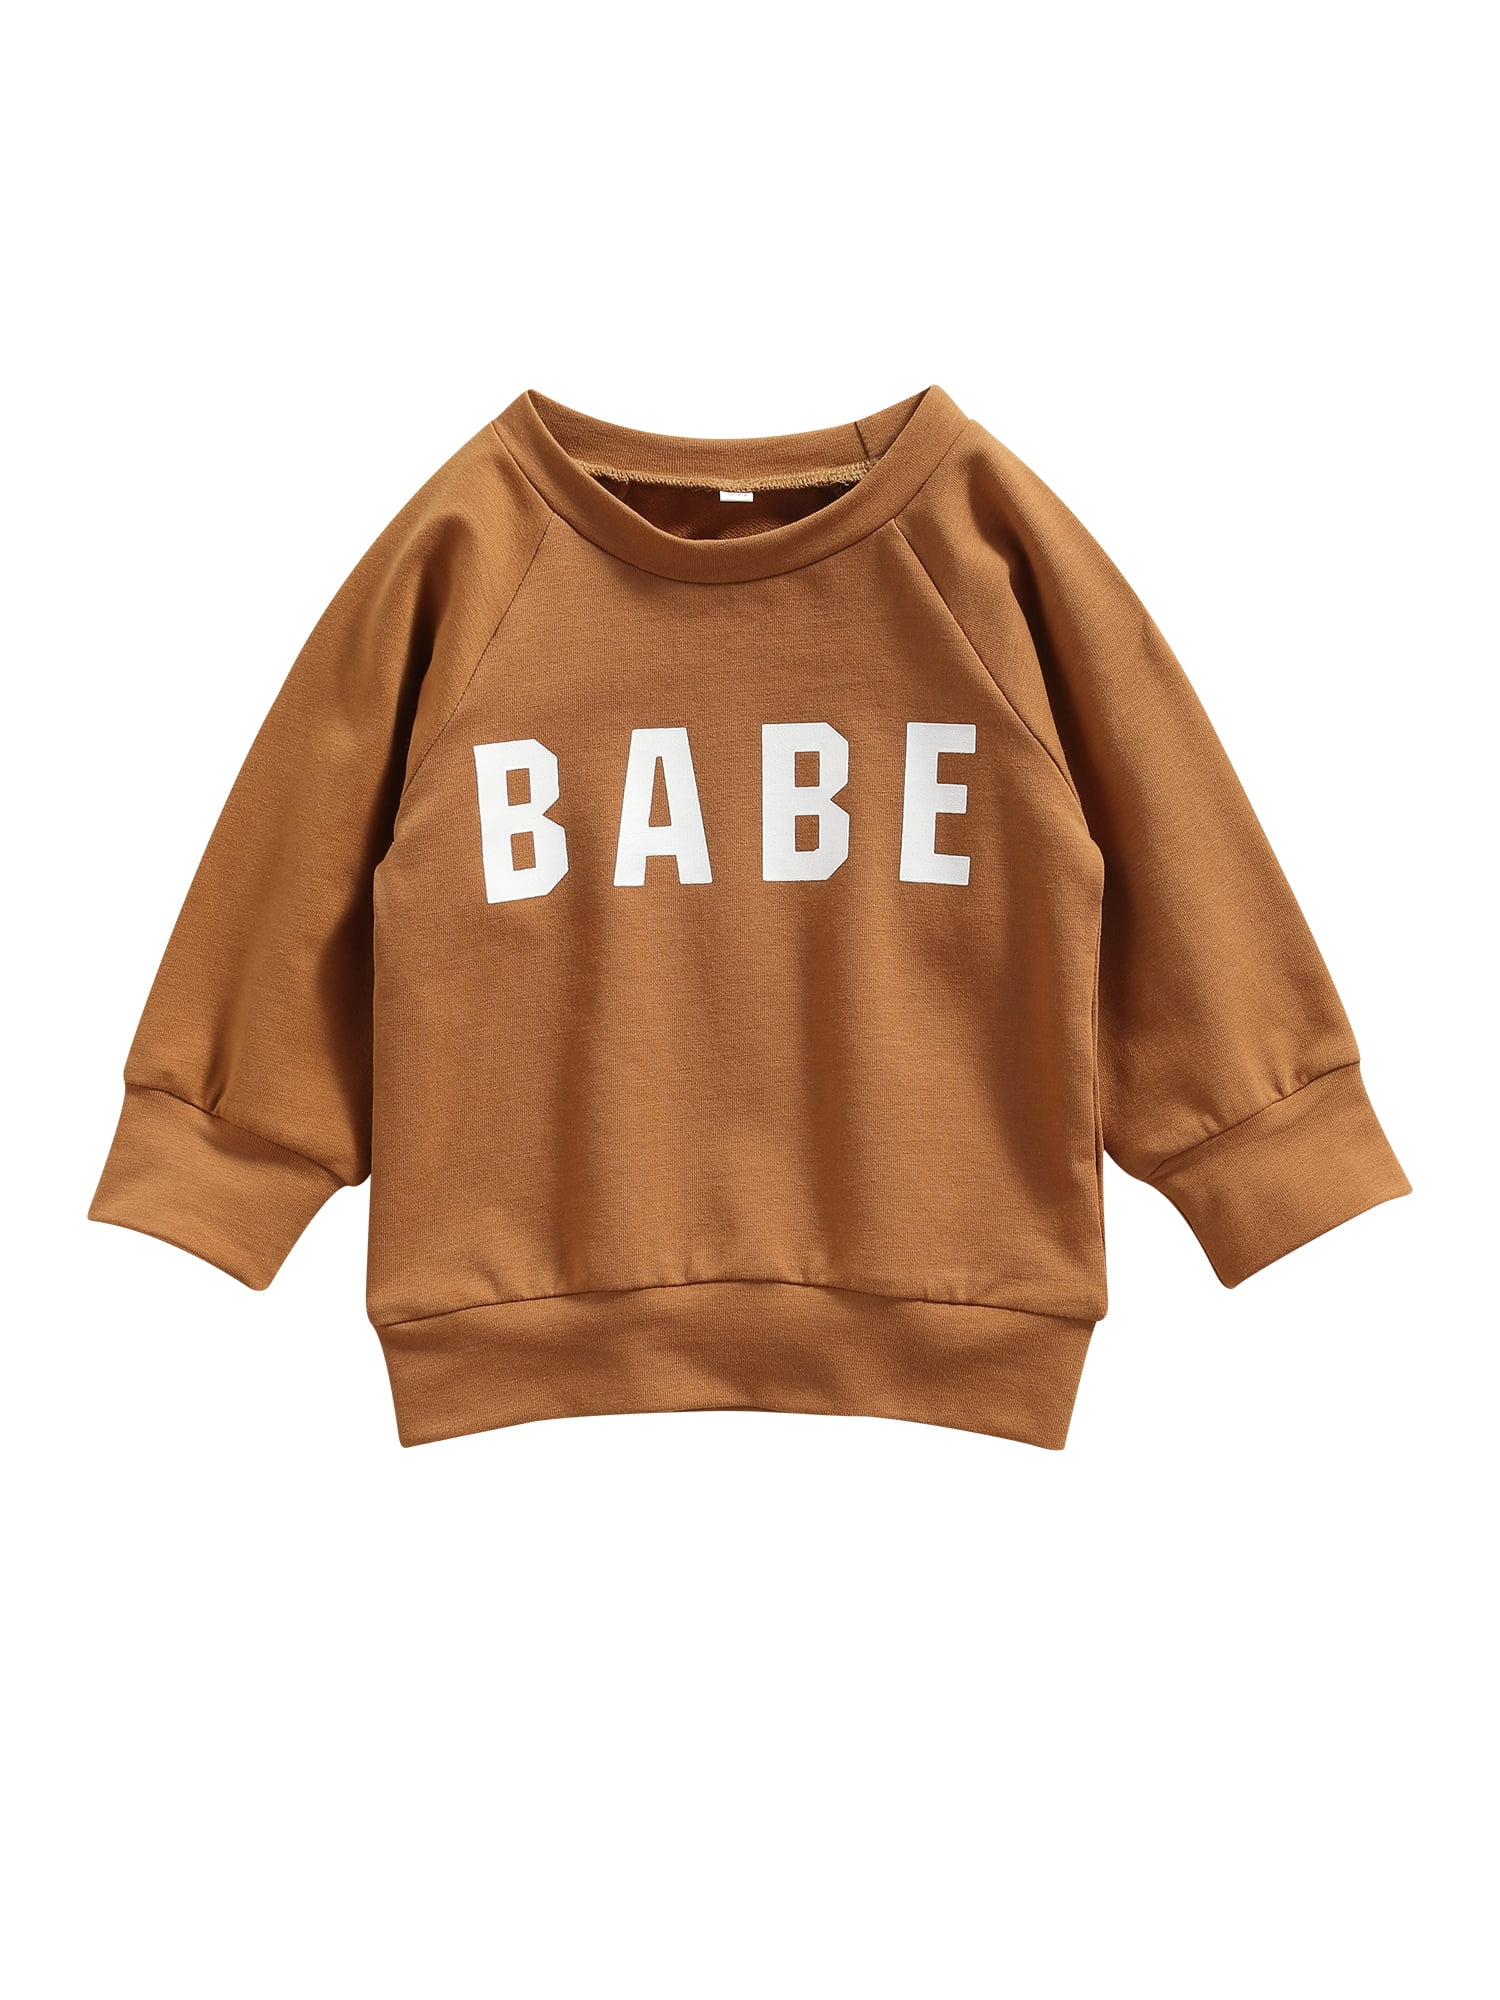 Unisex Baby Boy Girl Pullover Sweatshirt Toddler Baby Daisy Long Sleeve Crewneck Sweater T-Shirts Tops Blouse 